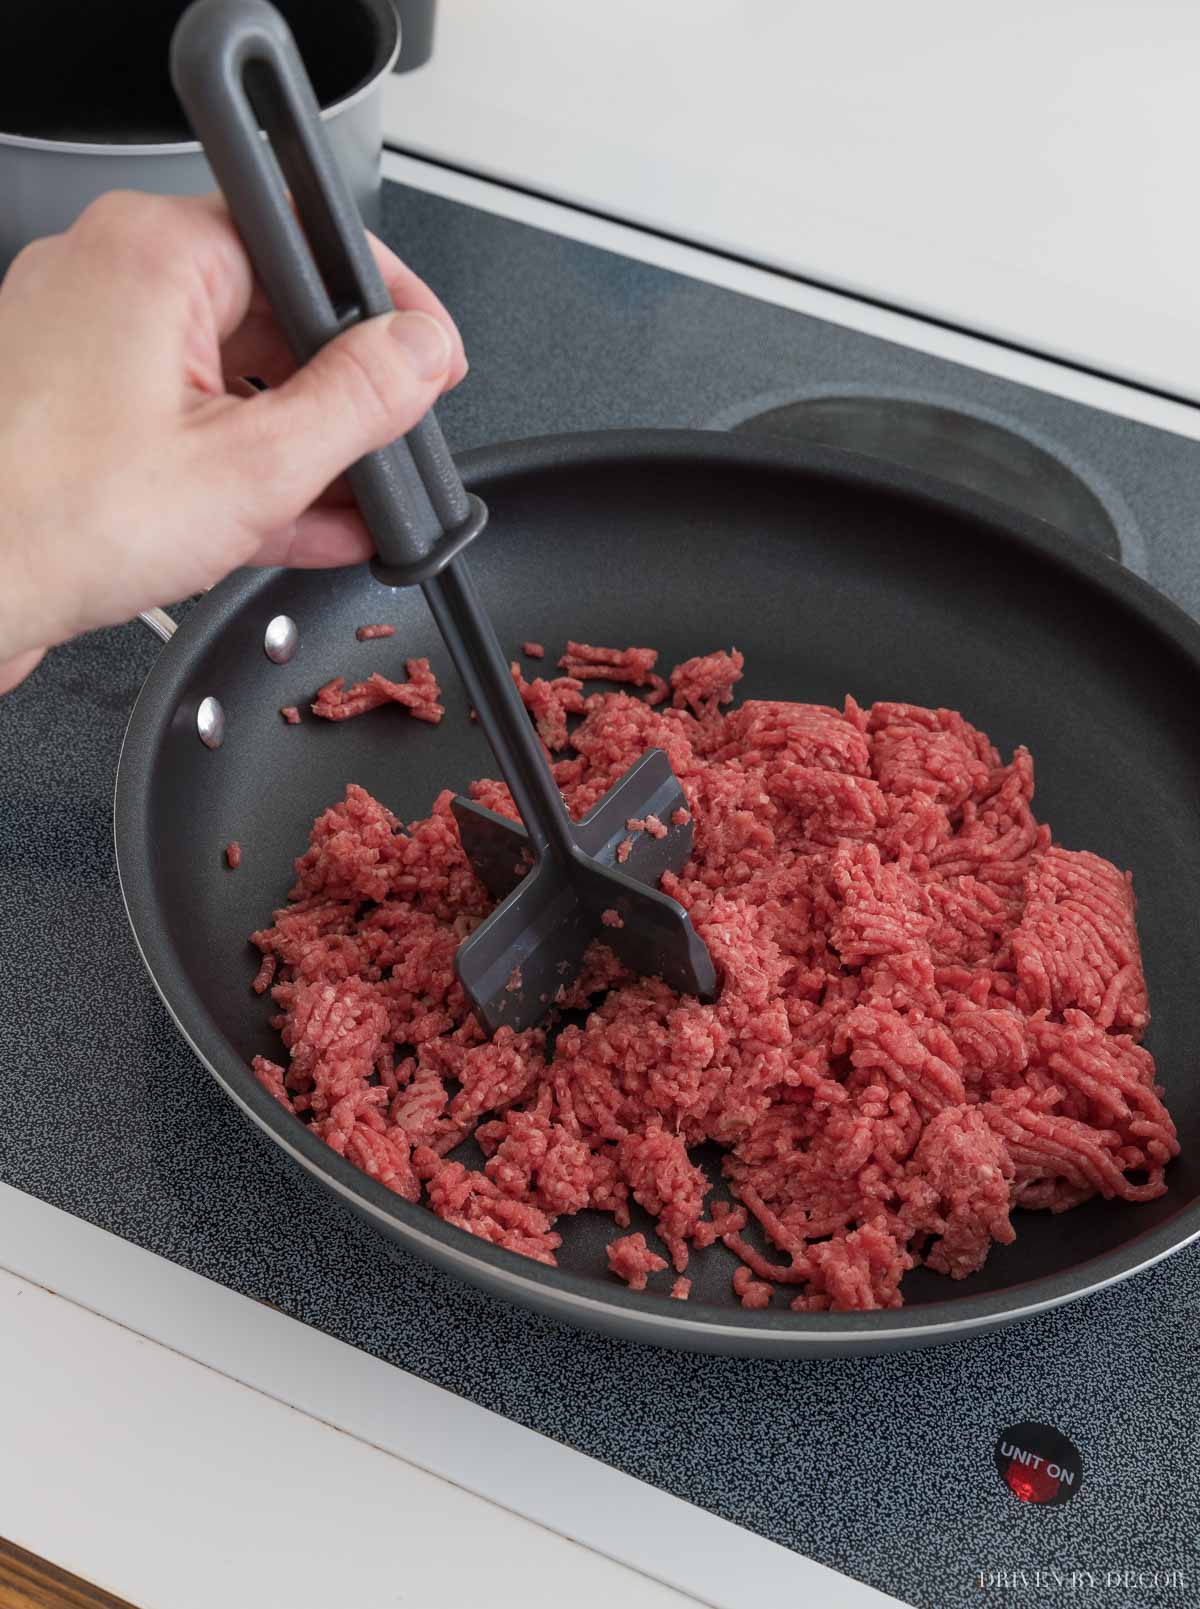 Love this meat chopper for ground beef and for mashing up avocados for guacamole! One of my favorite Amazon gadgets!